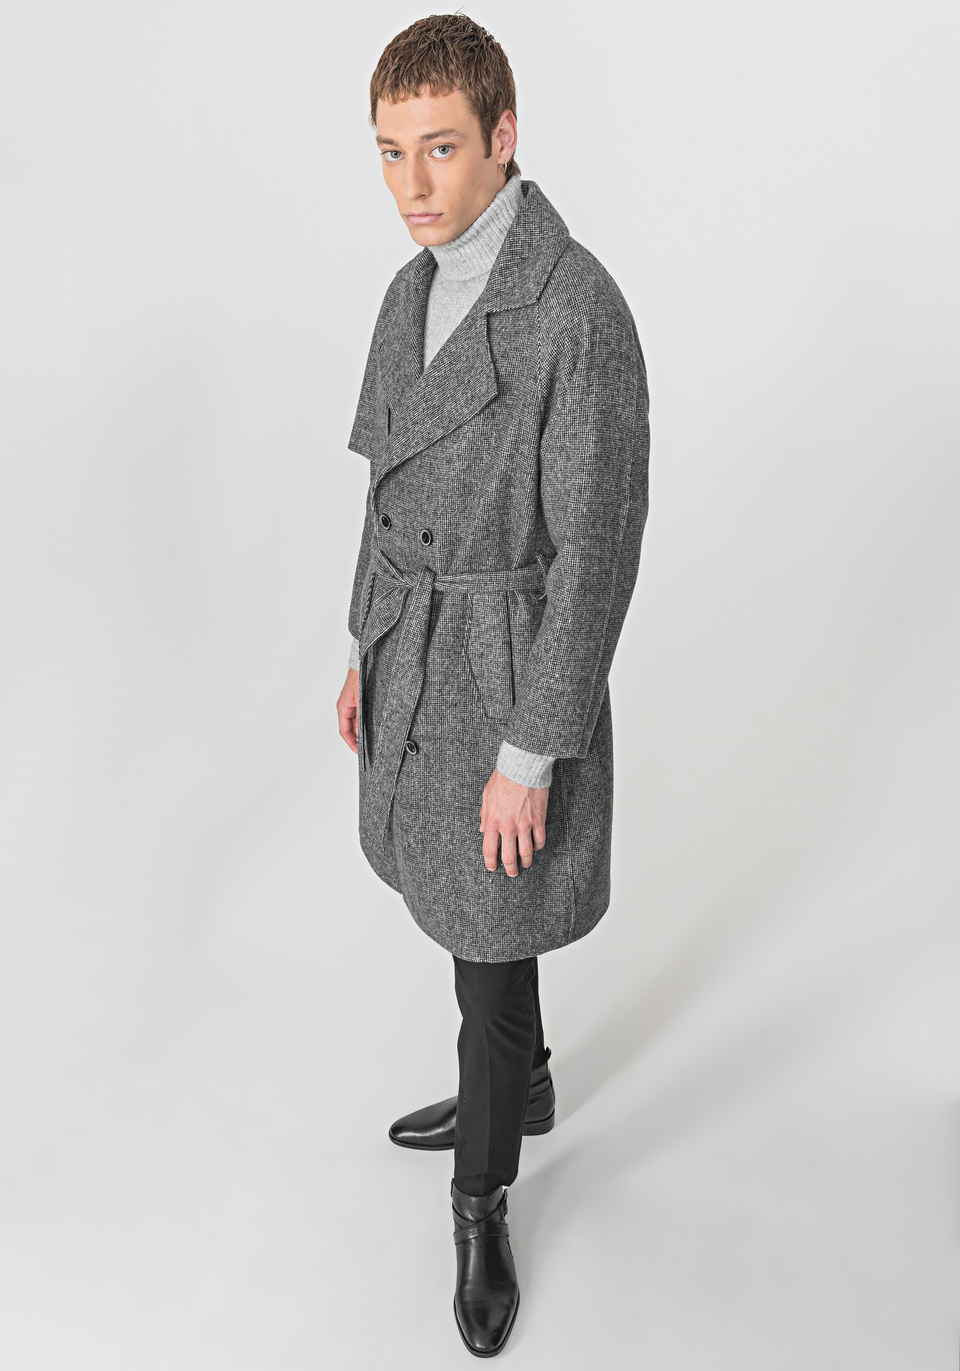 DOUBLE-BREASTED COAT IN A SOFT WOOL BLEND - Antony Morato Online Shop